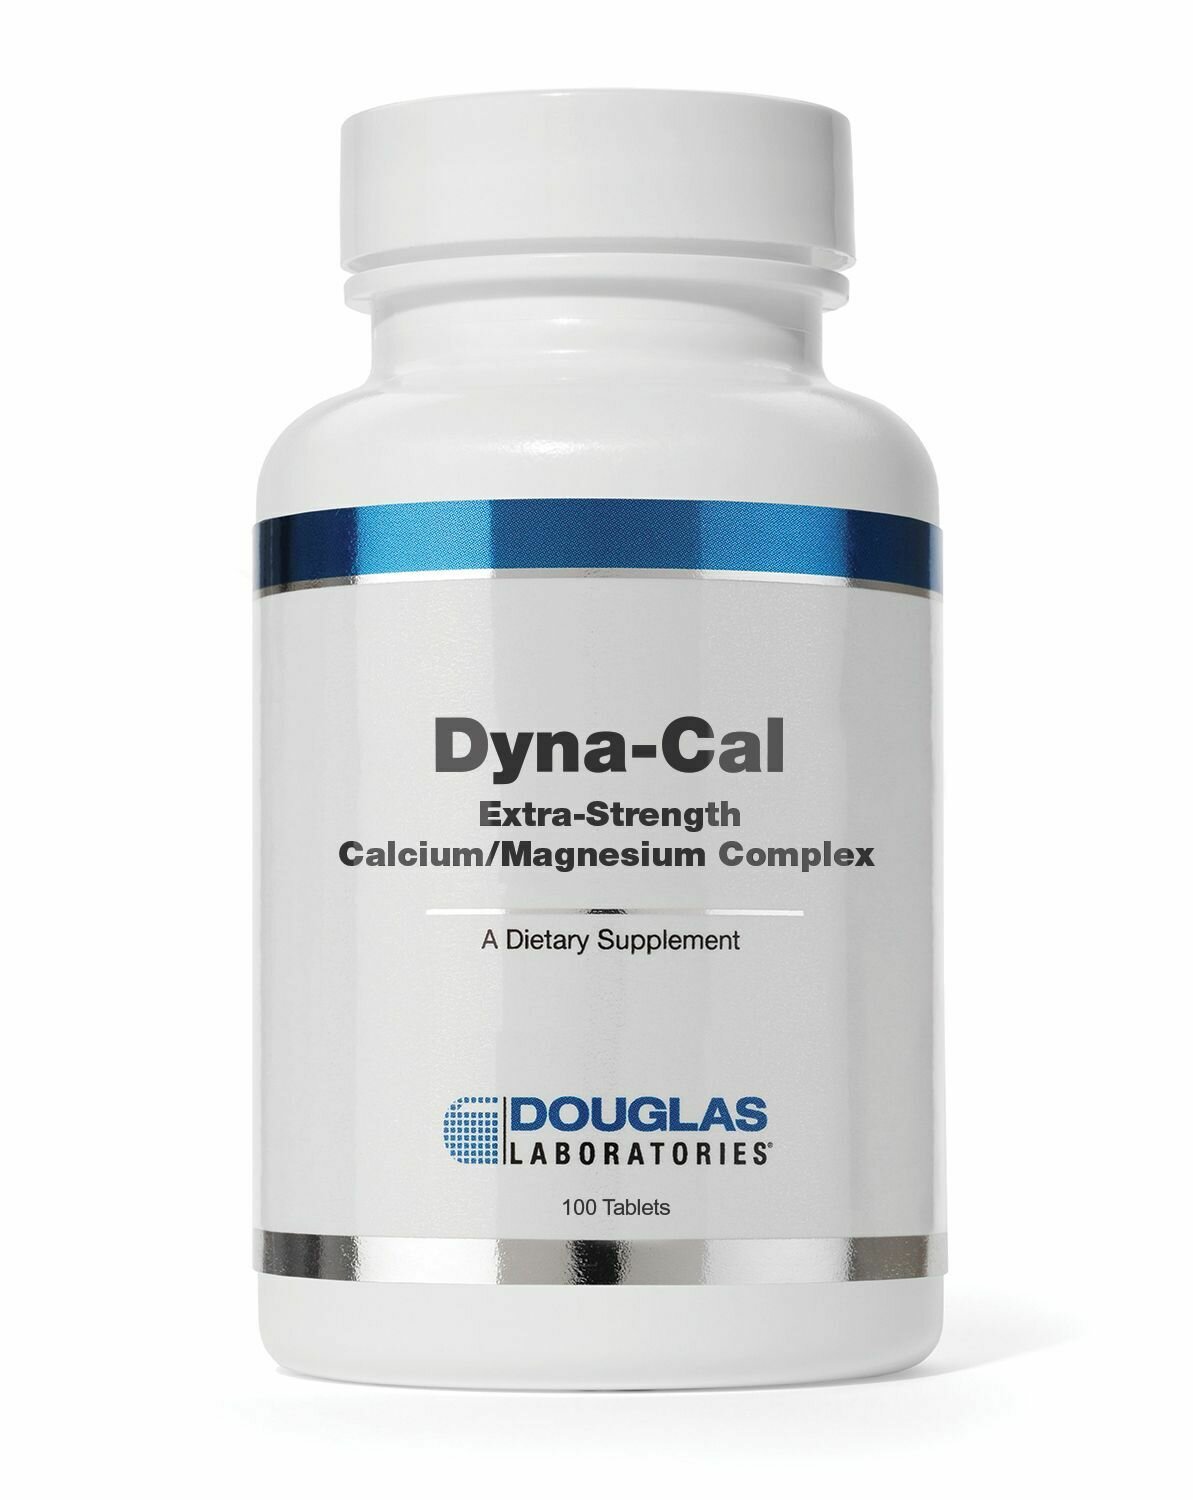 Dyna-Cal (250 count)